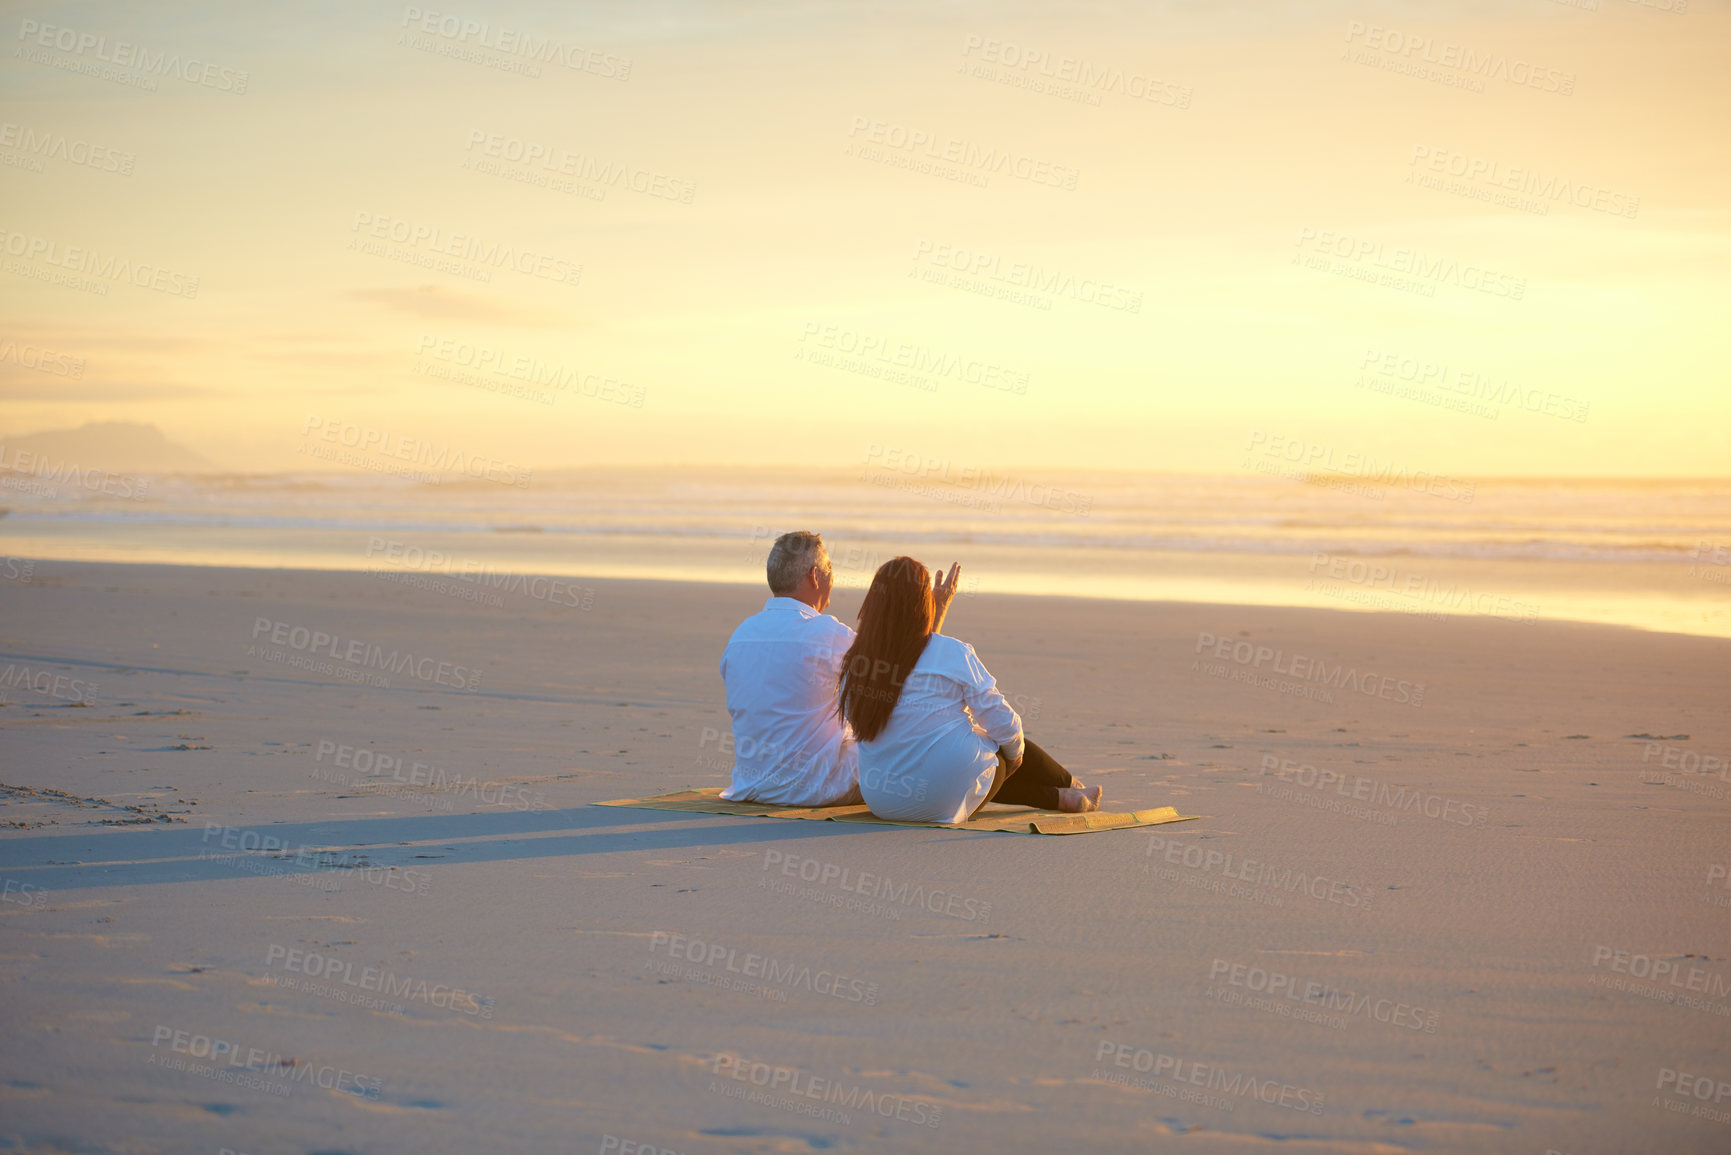 Buy stock photo Shot of a mature couple relaxing together on the beach